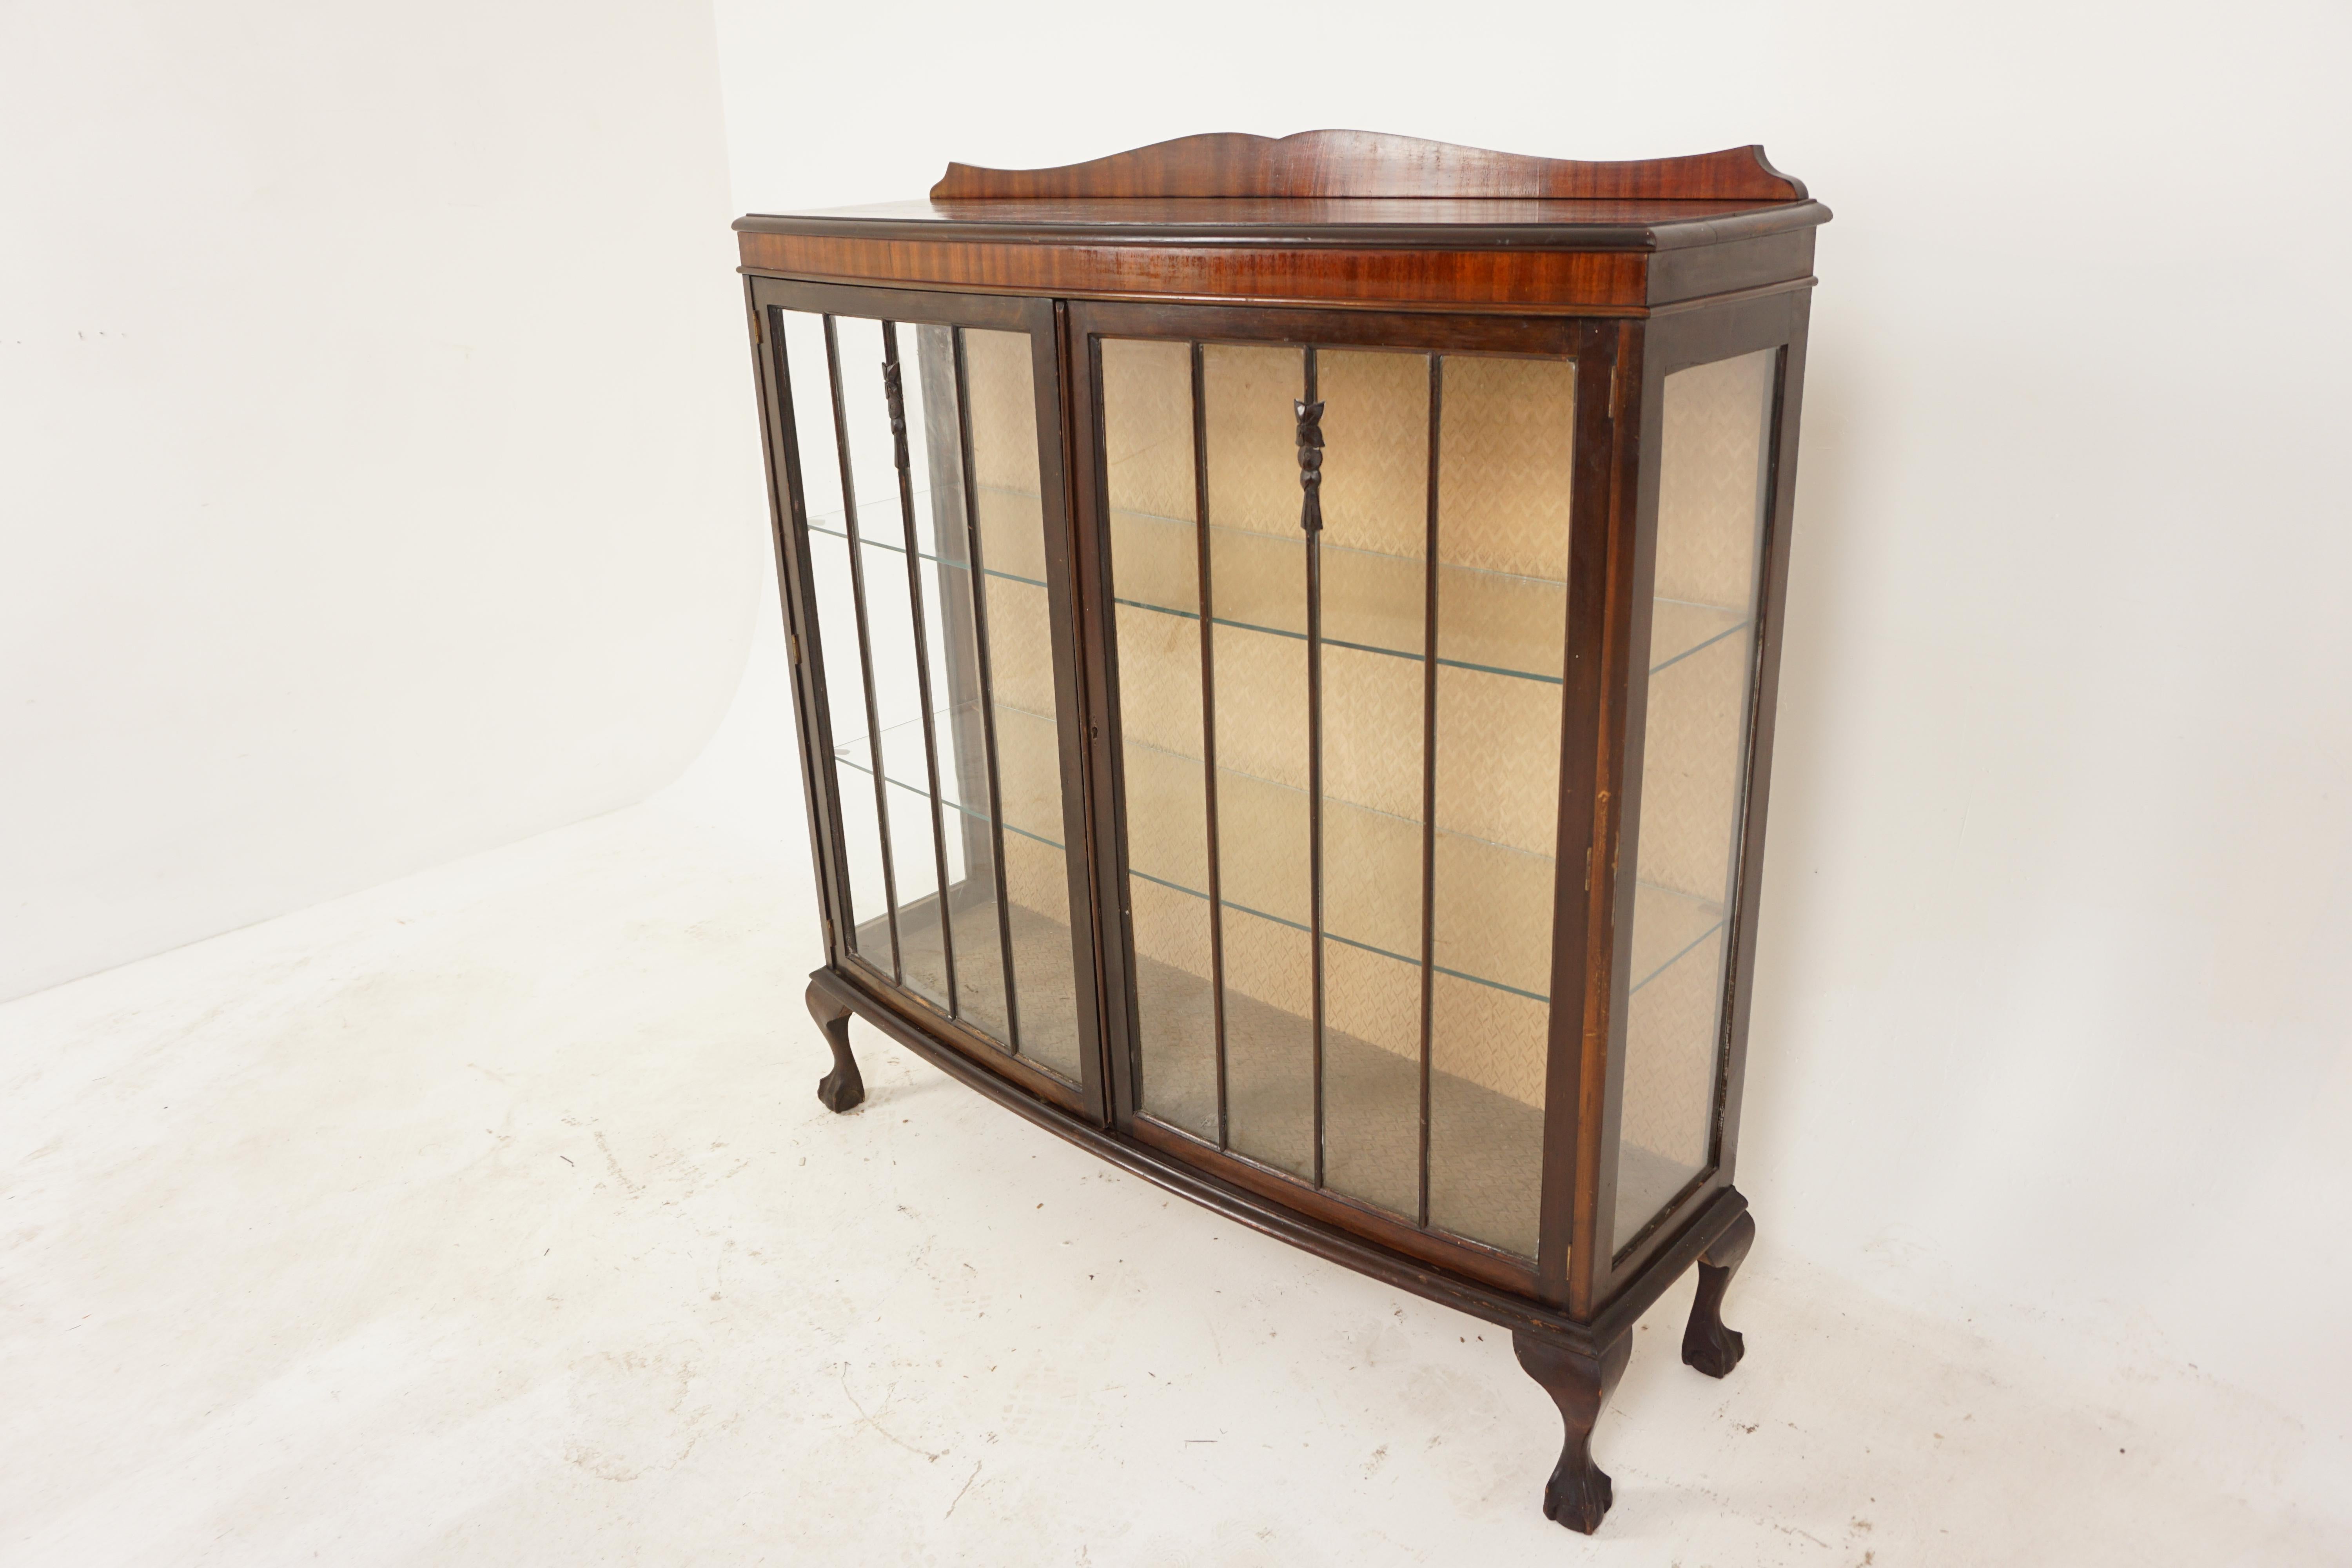 Antique walnut China cabinet, Display cabinet, Scotland 1920, B2682

Scotland 1920
Solid walnut
Original finish
Bow front top with small pediment on the back
Pair of original glass doors with wooden molding on the front.
Glam sides
Comes